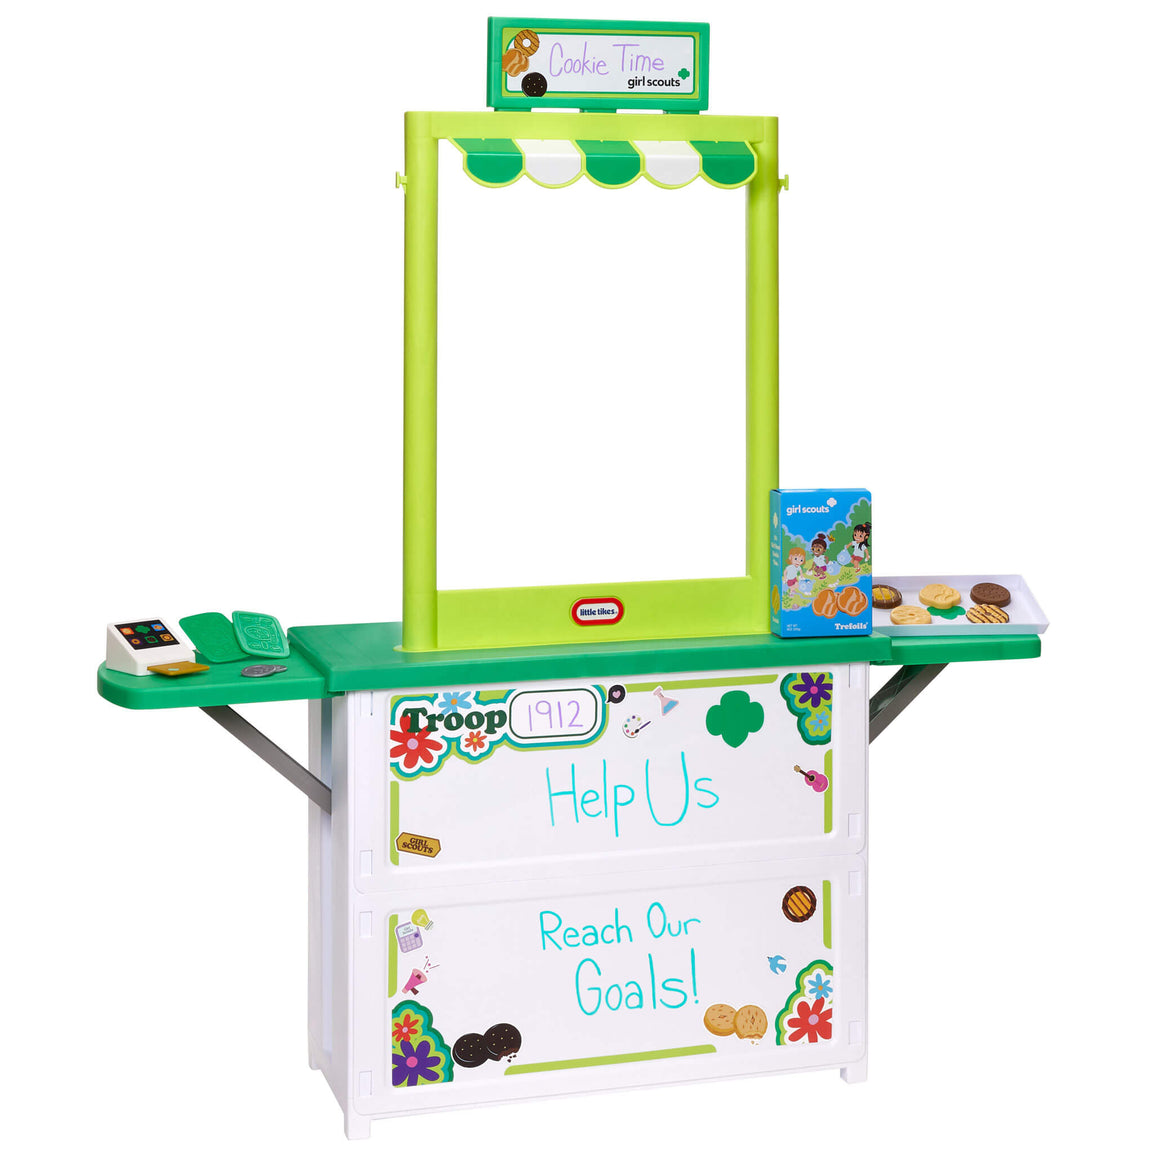 Girl Scout Cookie Booth - Official Little Tikes Website